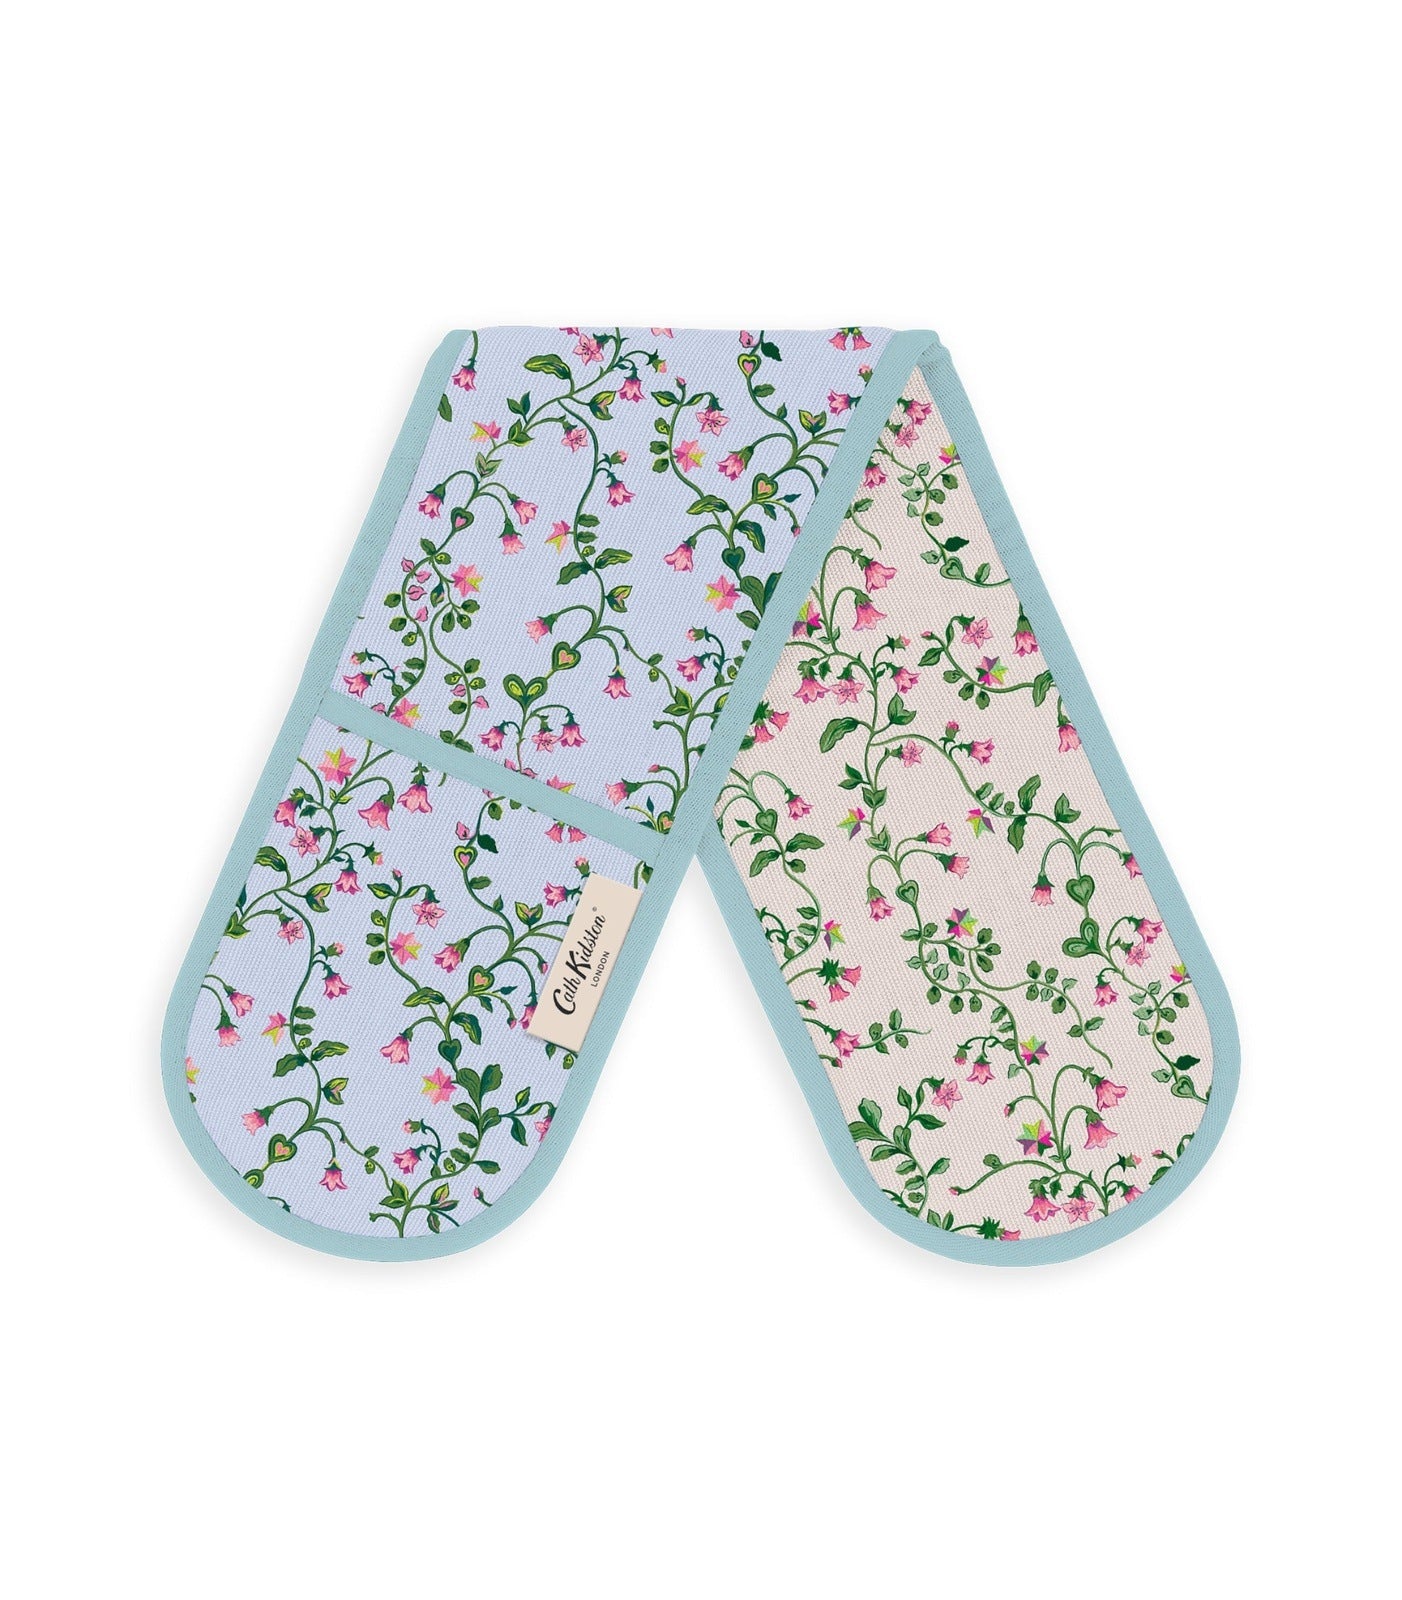 Cath Kidston Twin Flowers Double Oven Glove 1 Shaws Department Stores